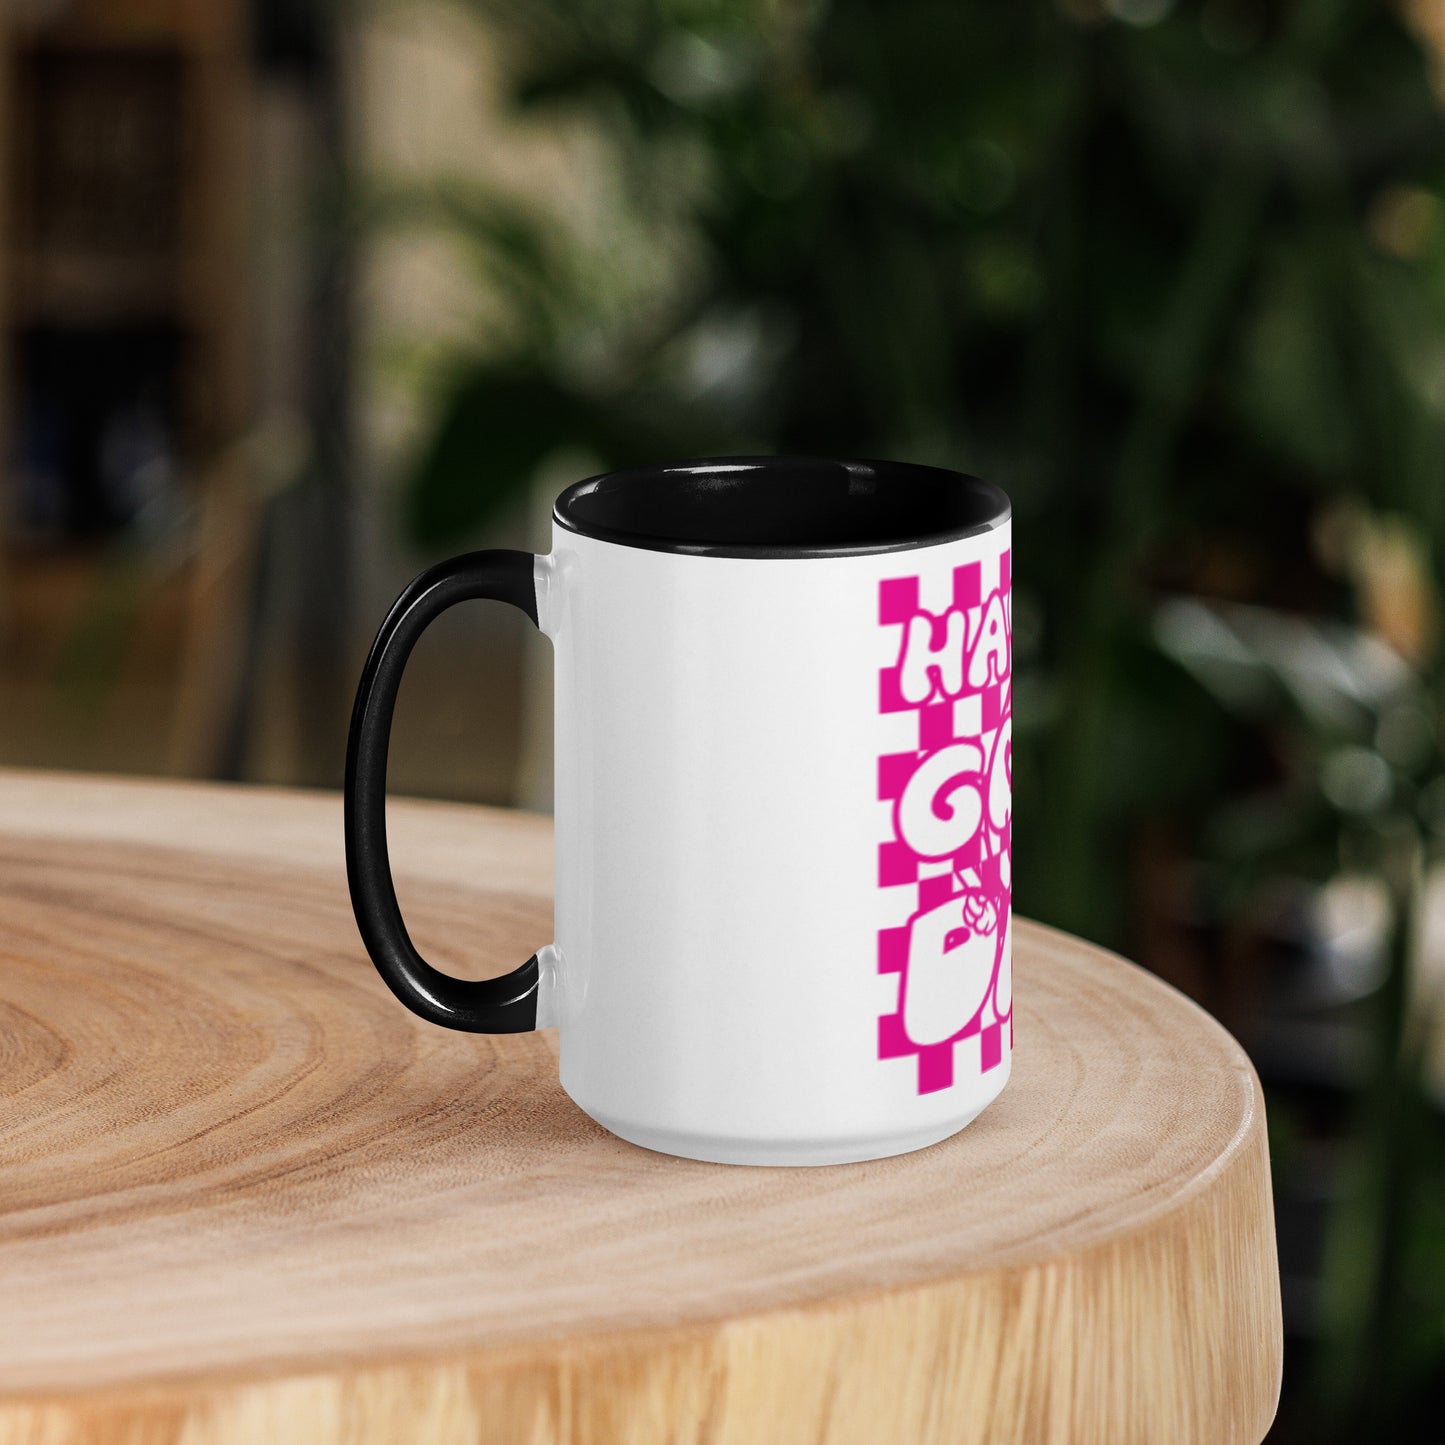 Hot Pink Smiley Face, and Have A Good Day, White Mug with Color Inside